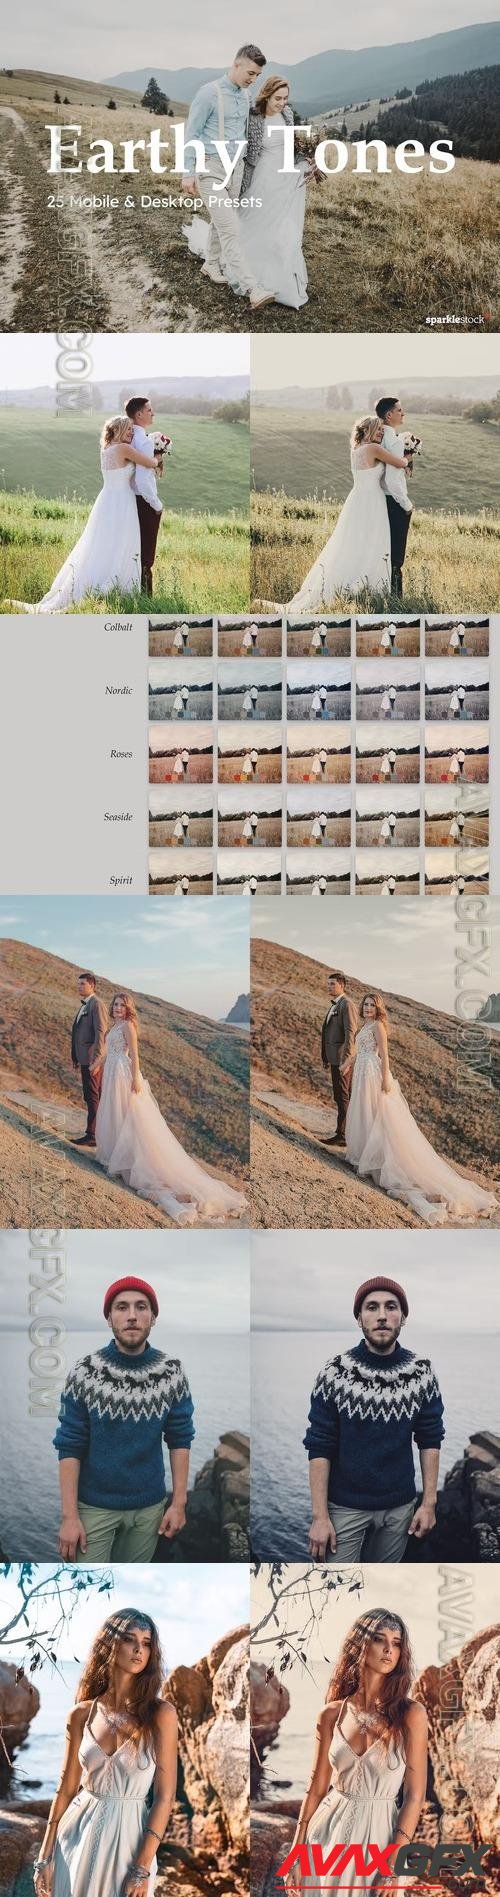 25 Earthy Tones Lightroom Presets and LUTs